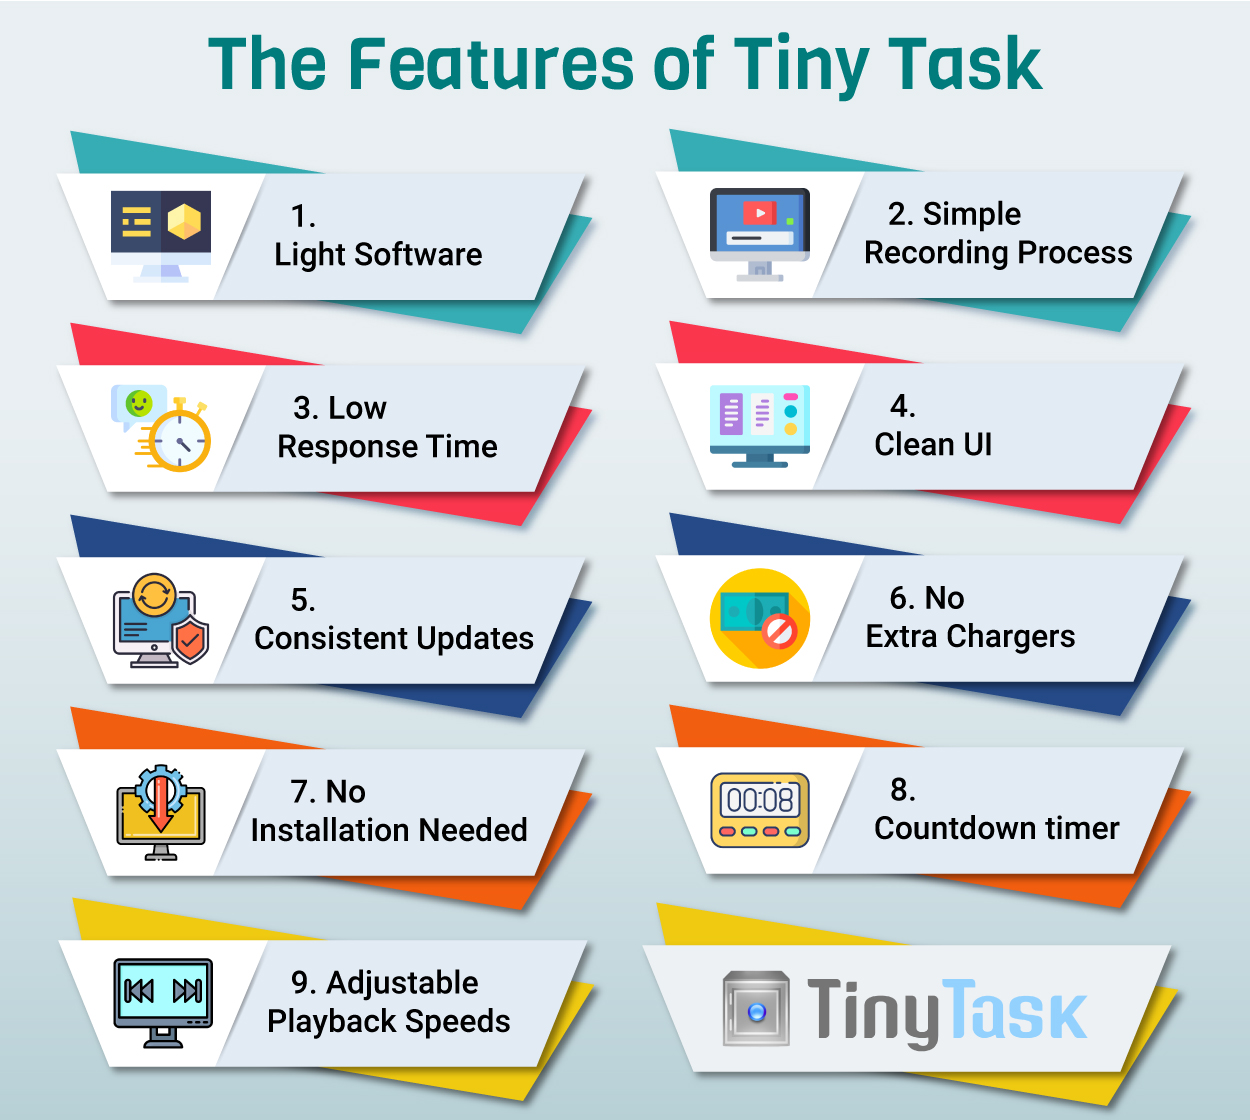 Features of Tiny Task